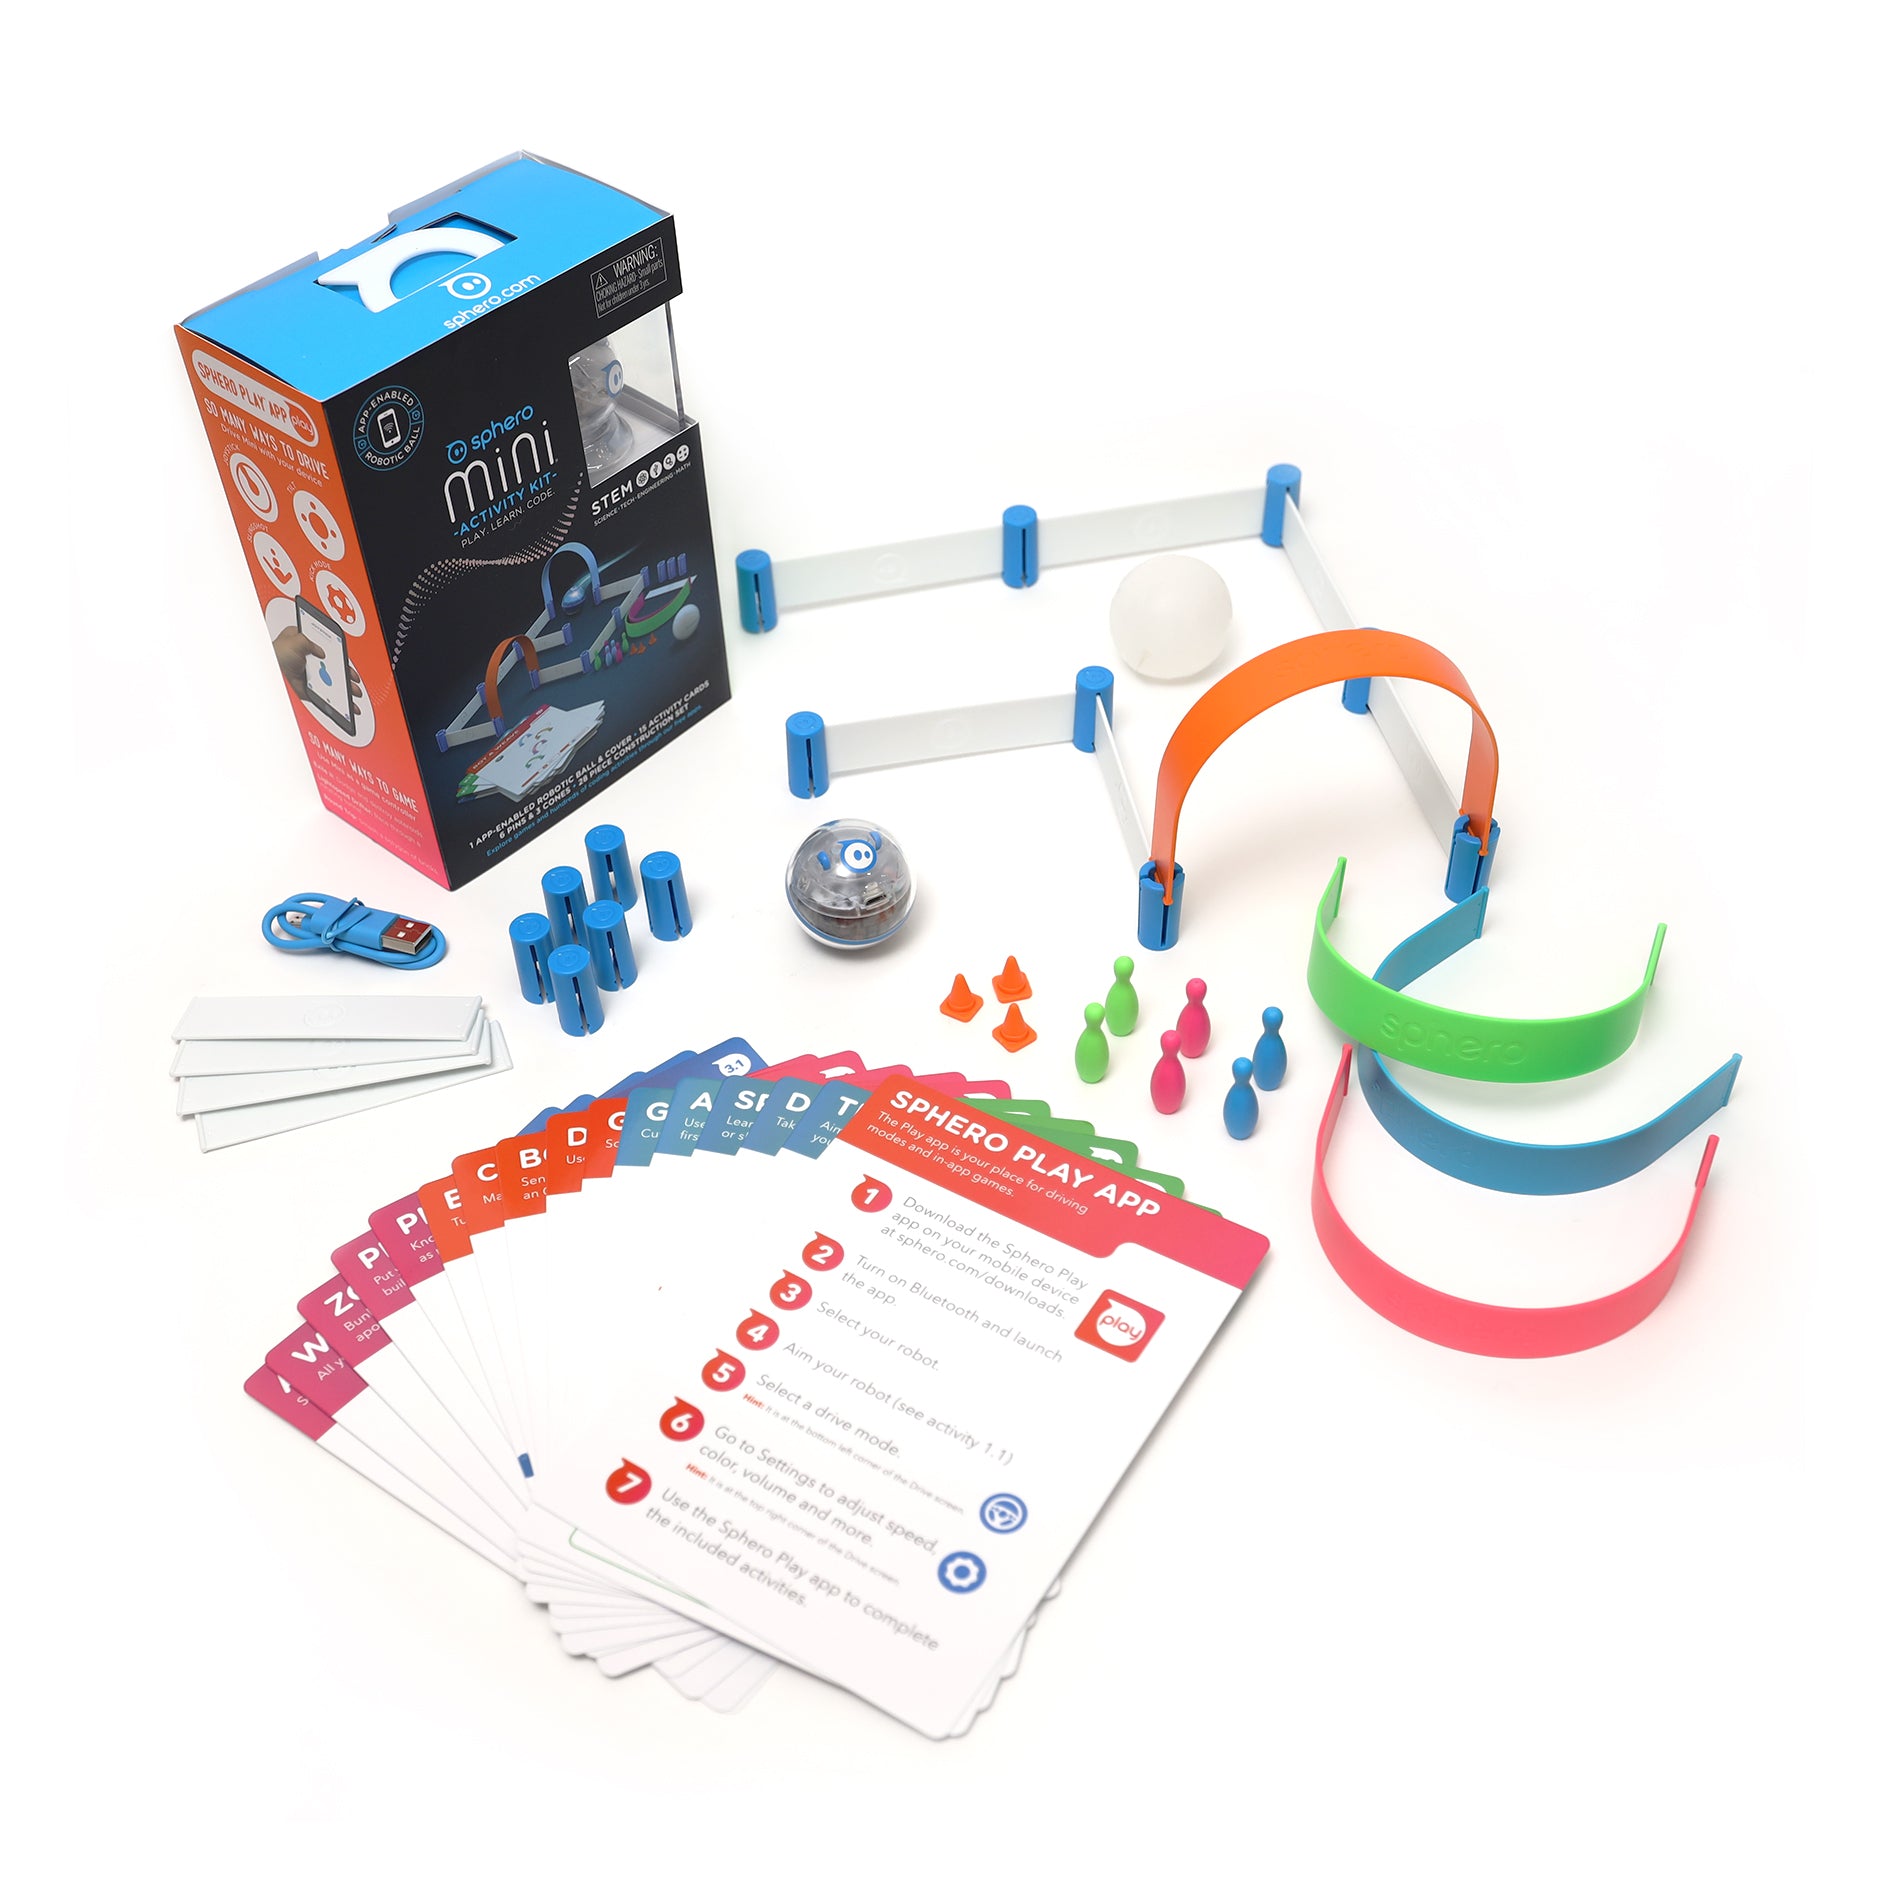 Sphero Mini Soccer: App-Enabled Programmable Robot Ball - STEM Educational  Toy for Kids Ages 8 & Up - Drive, Game & Code with Play & Edu App